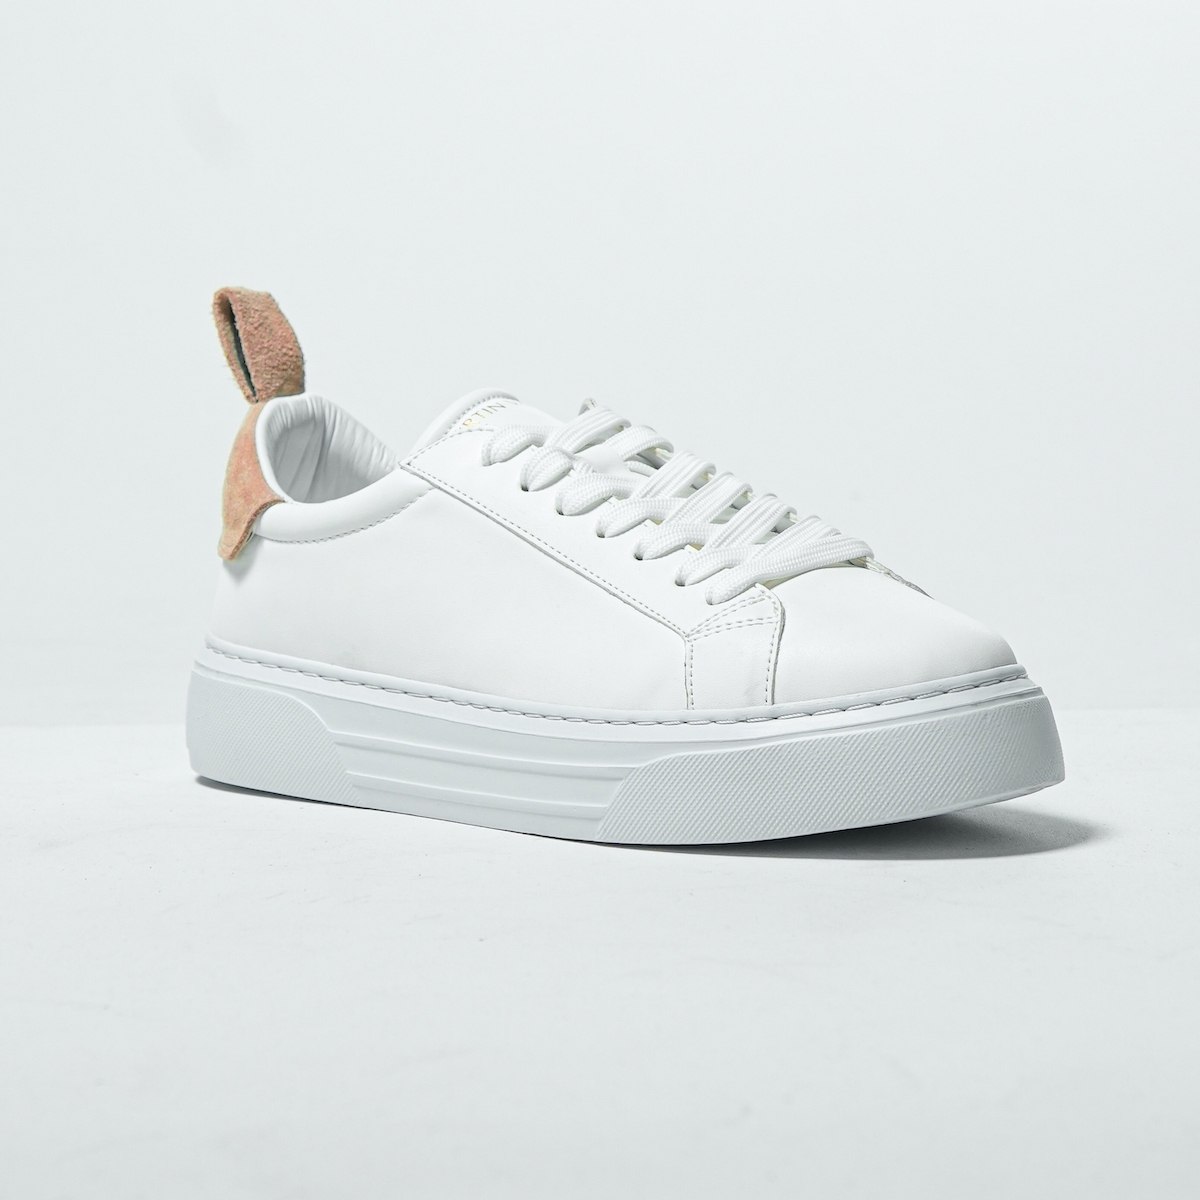 Bobe Suede Belted New Sneakers White Beige | Martin Valen